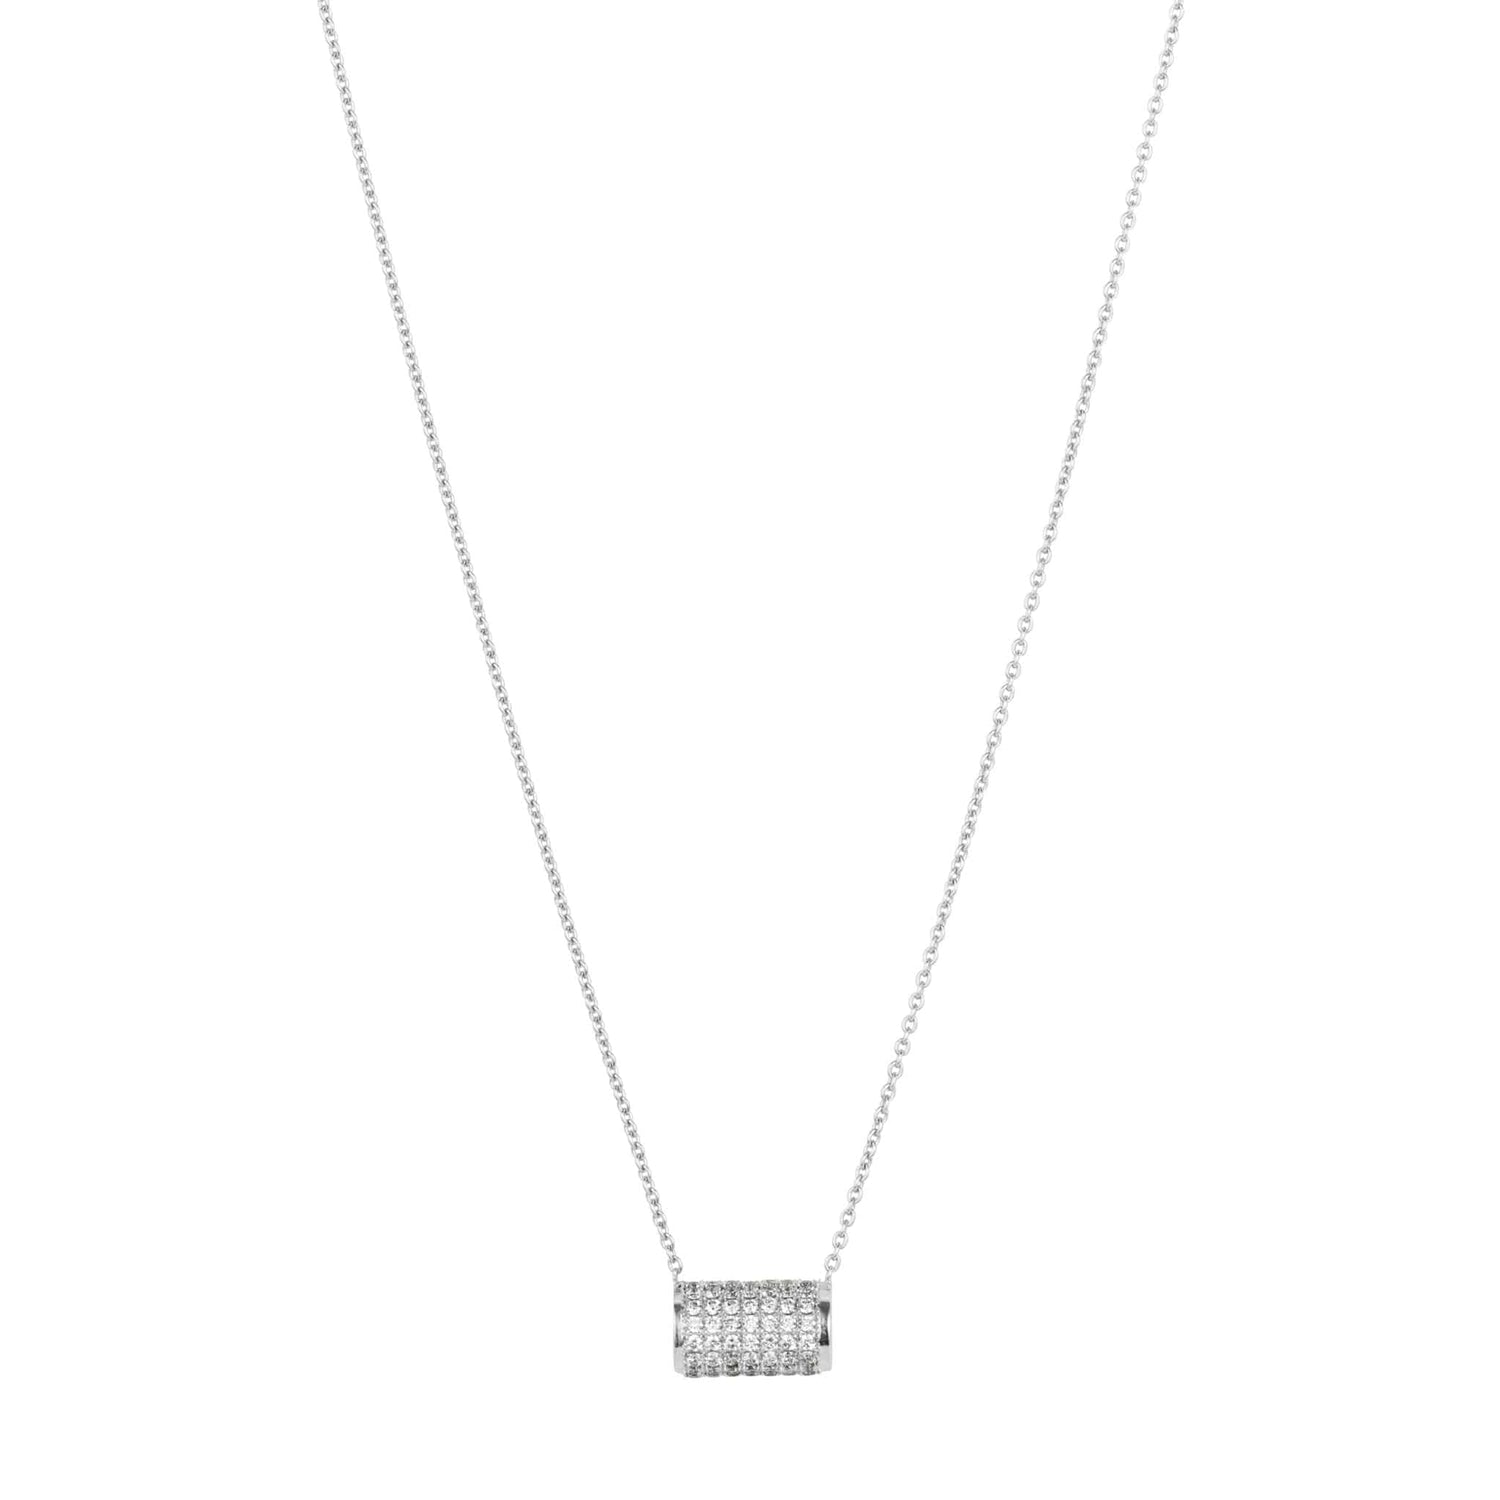 Cylinder pendant necklace and chain